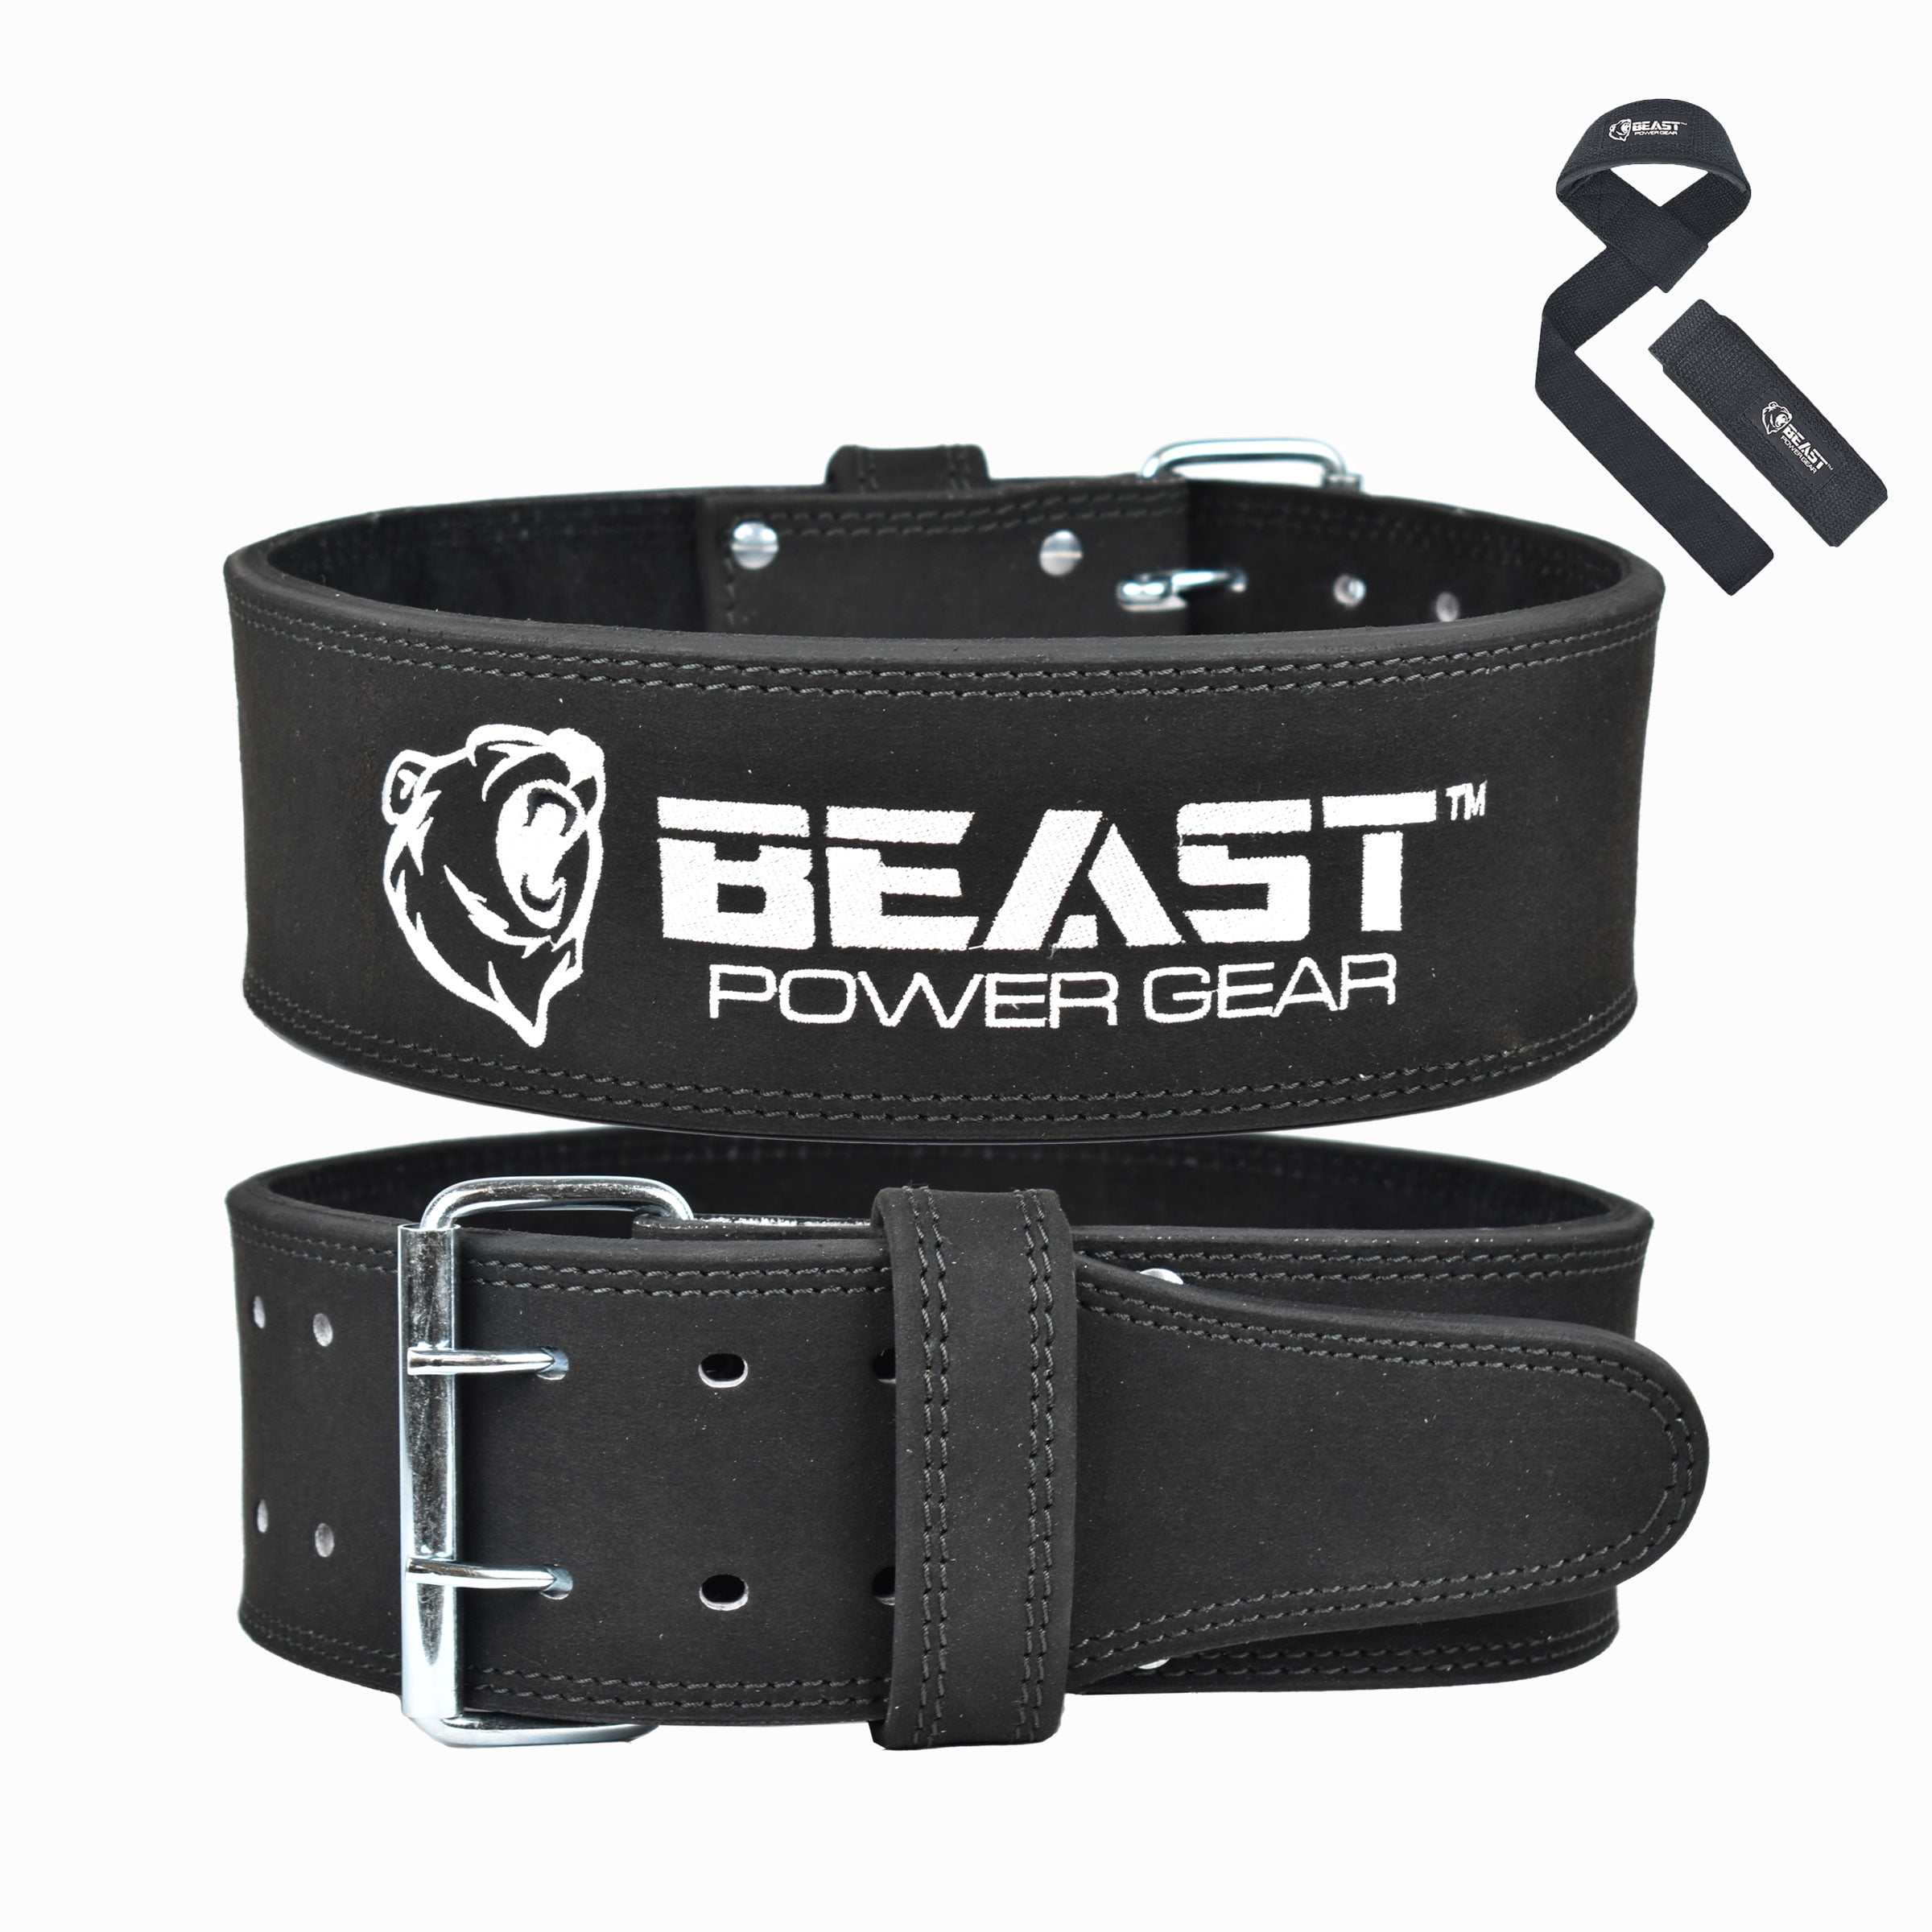 Blue, L Olympic Weight lifting belts for men and women deadlift belt protect and stabilize the back and abdominal areas 